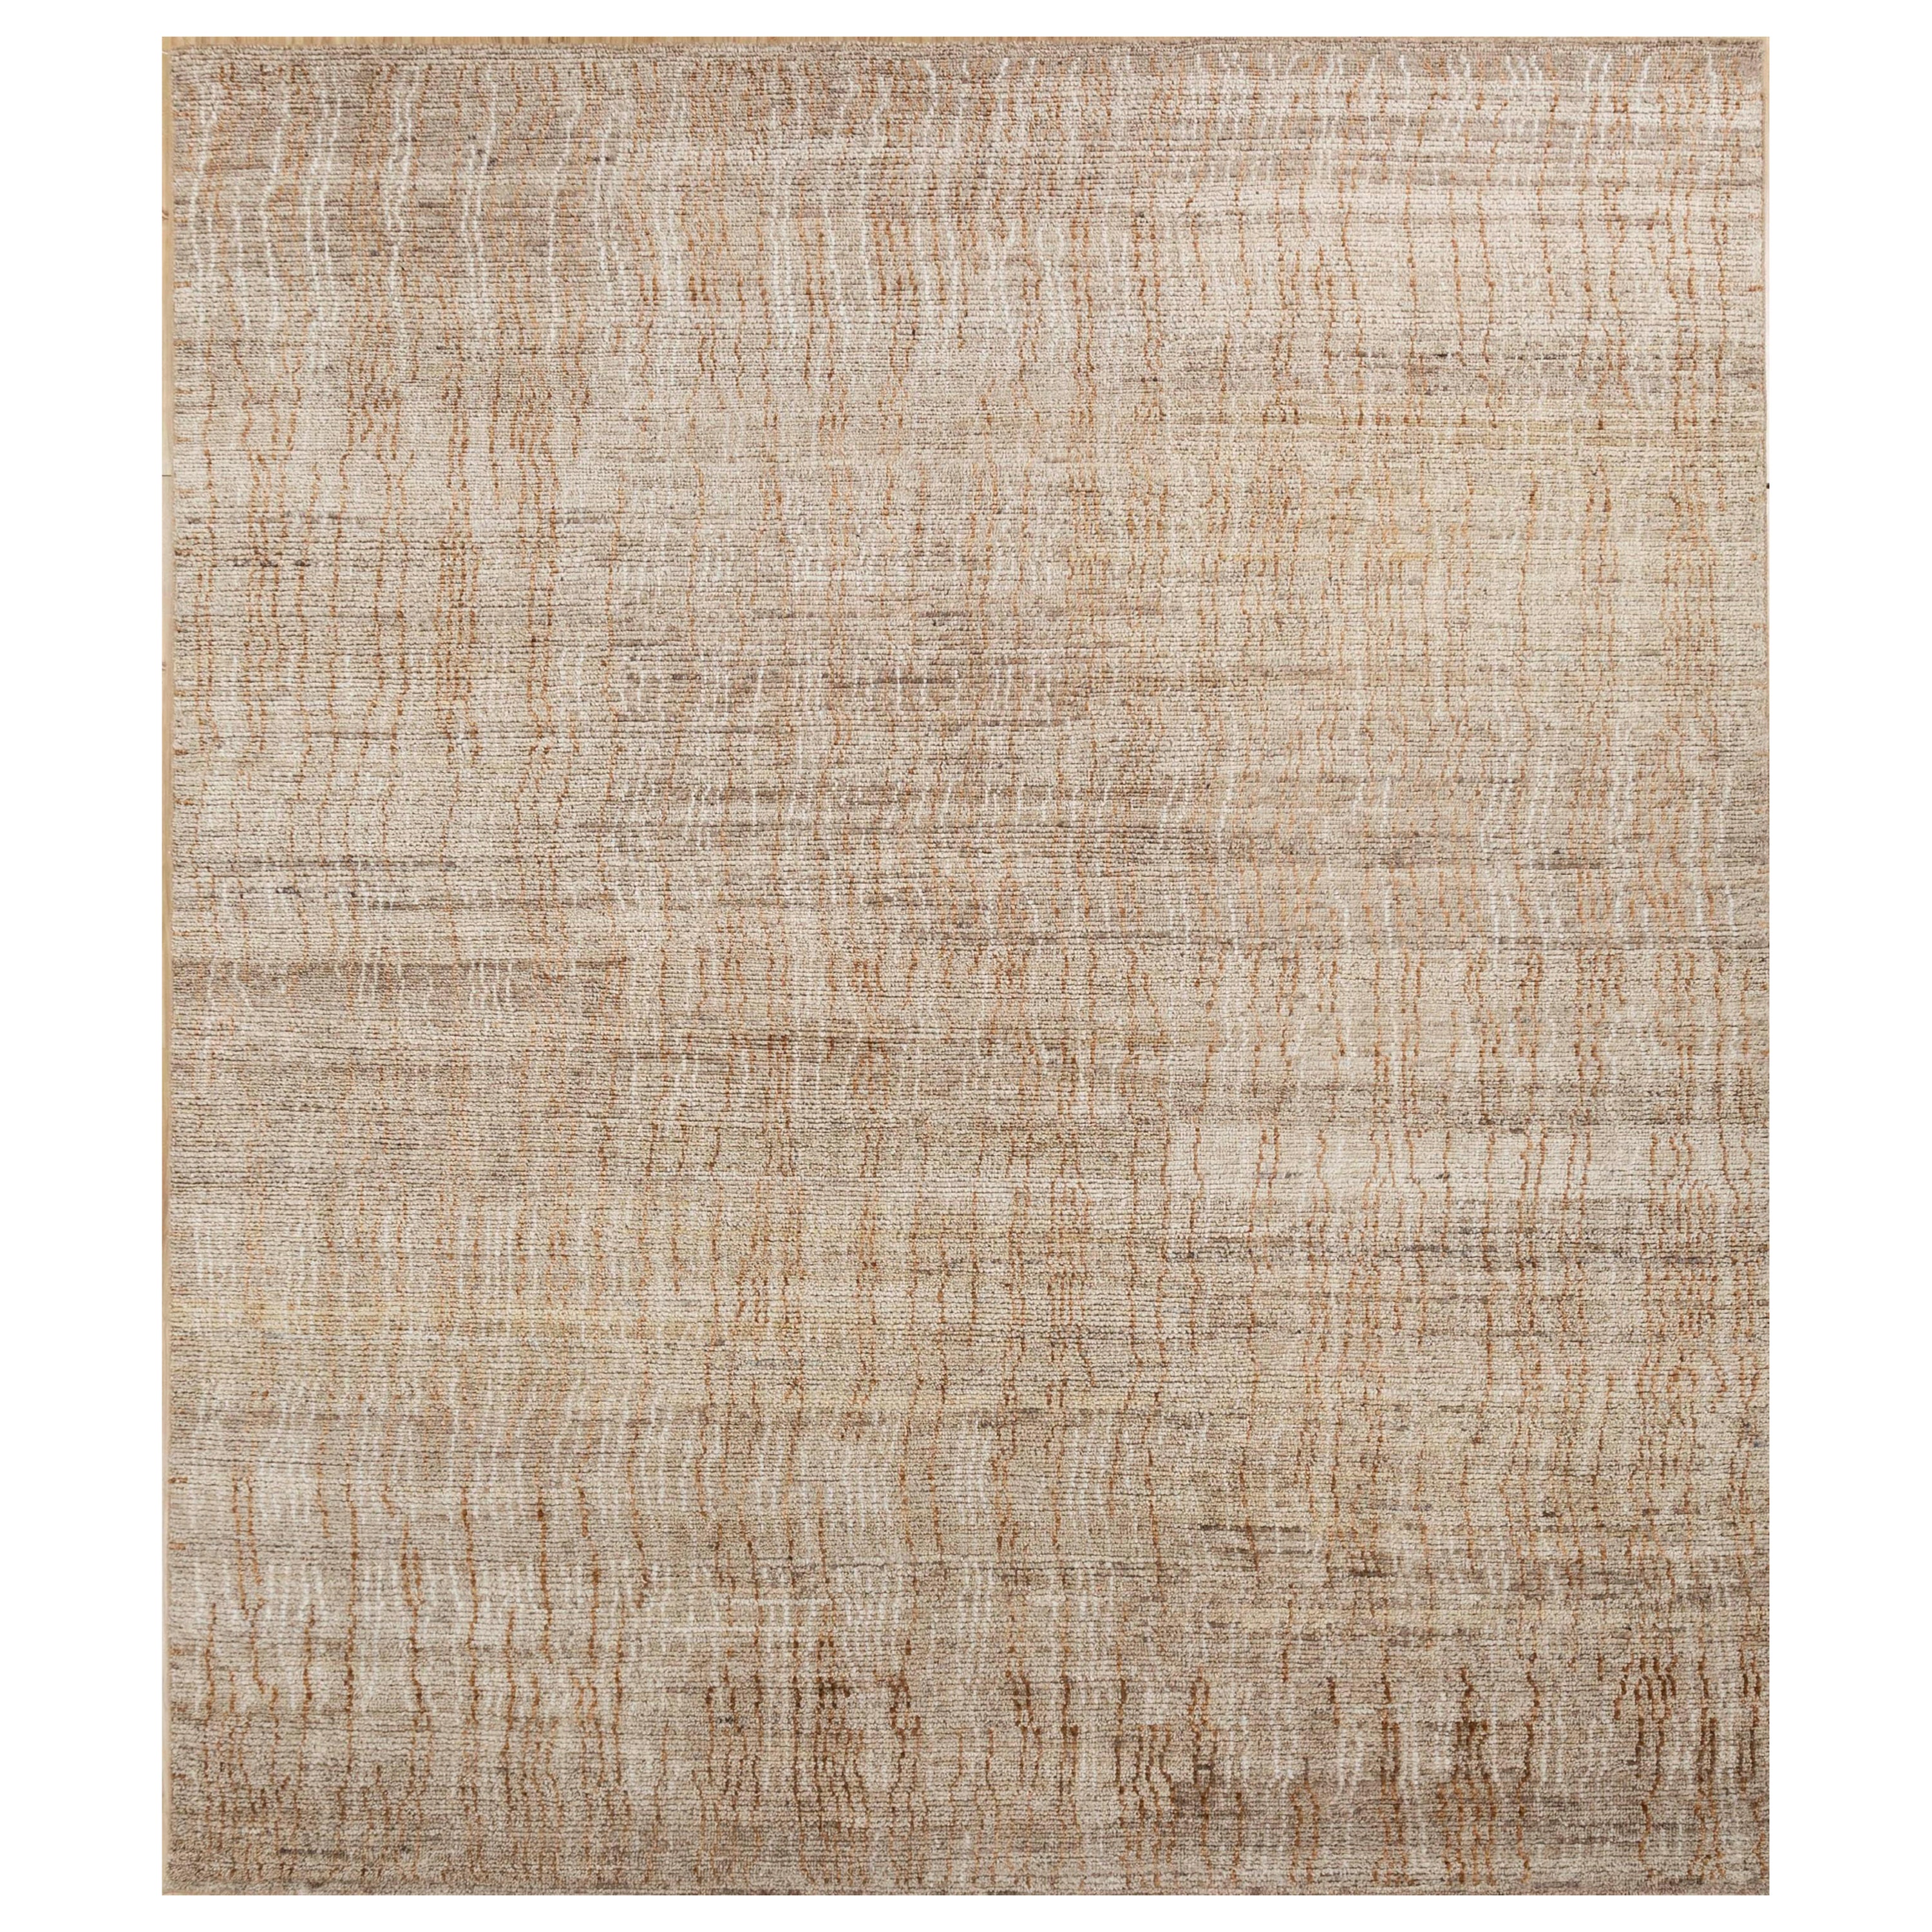 Mystique Splendor Clay & Clay180x270 cm Hand Knotted Rug For Sale